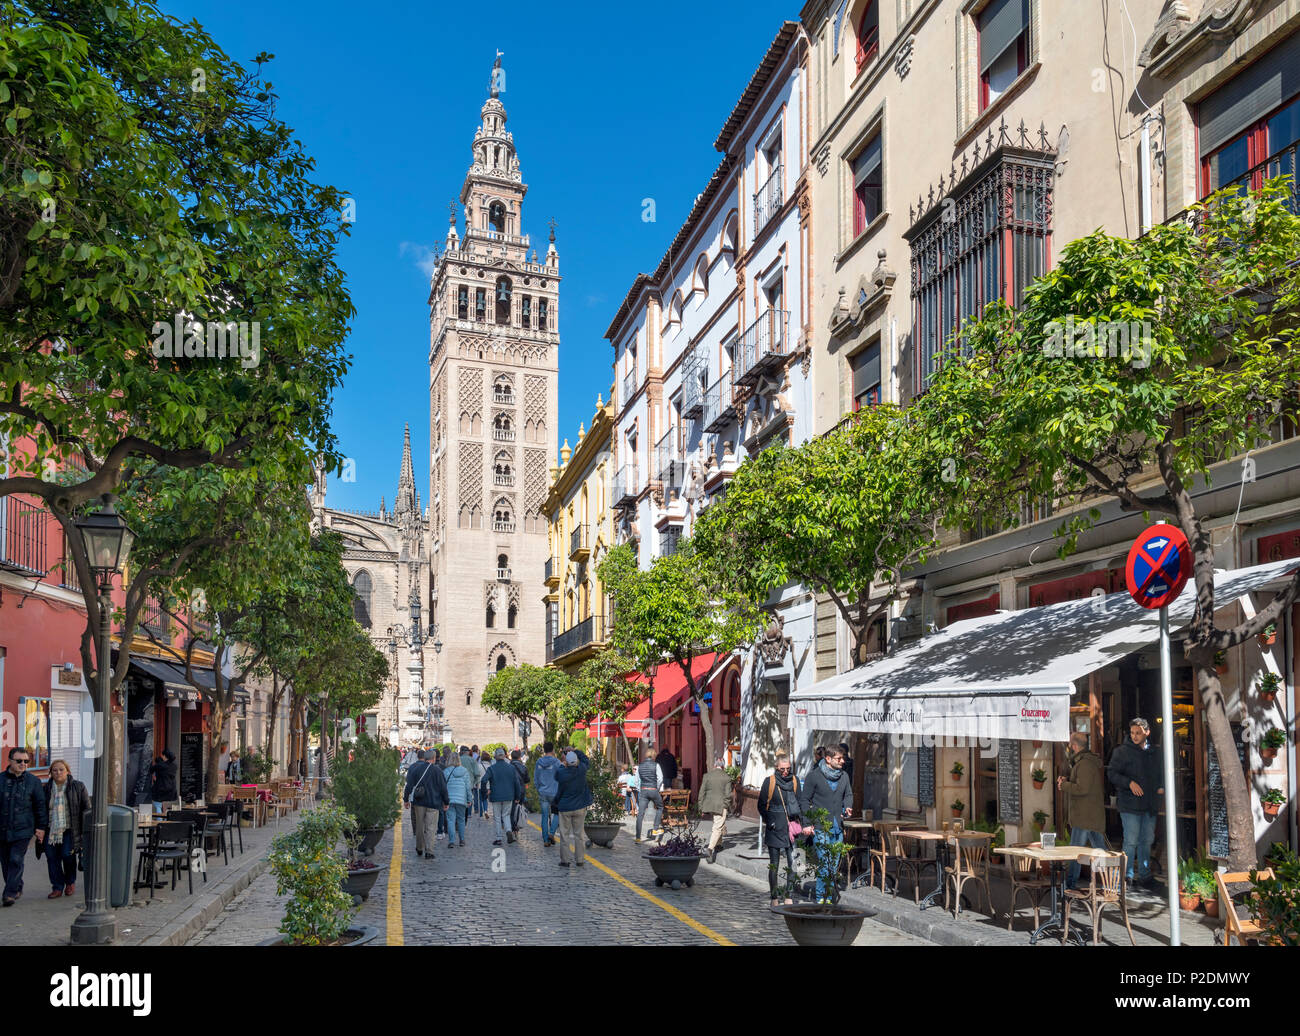 Seville, Spain. Cafes on Calle Mateos Gago looking towards the Giralda tower and Cathedral, Sevilla, Spain Stock Photo